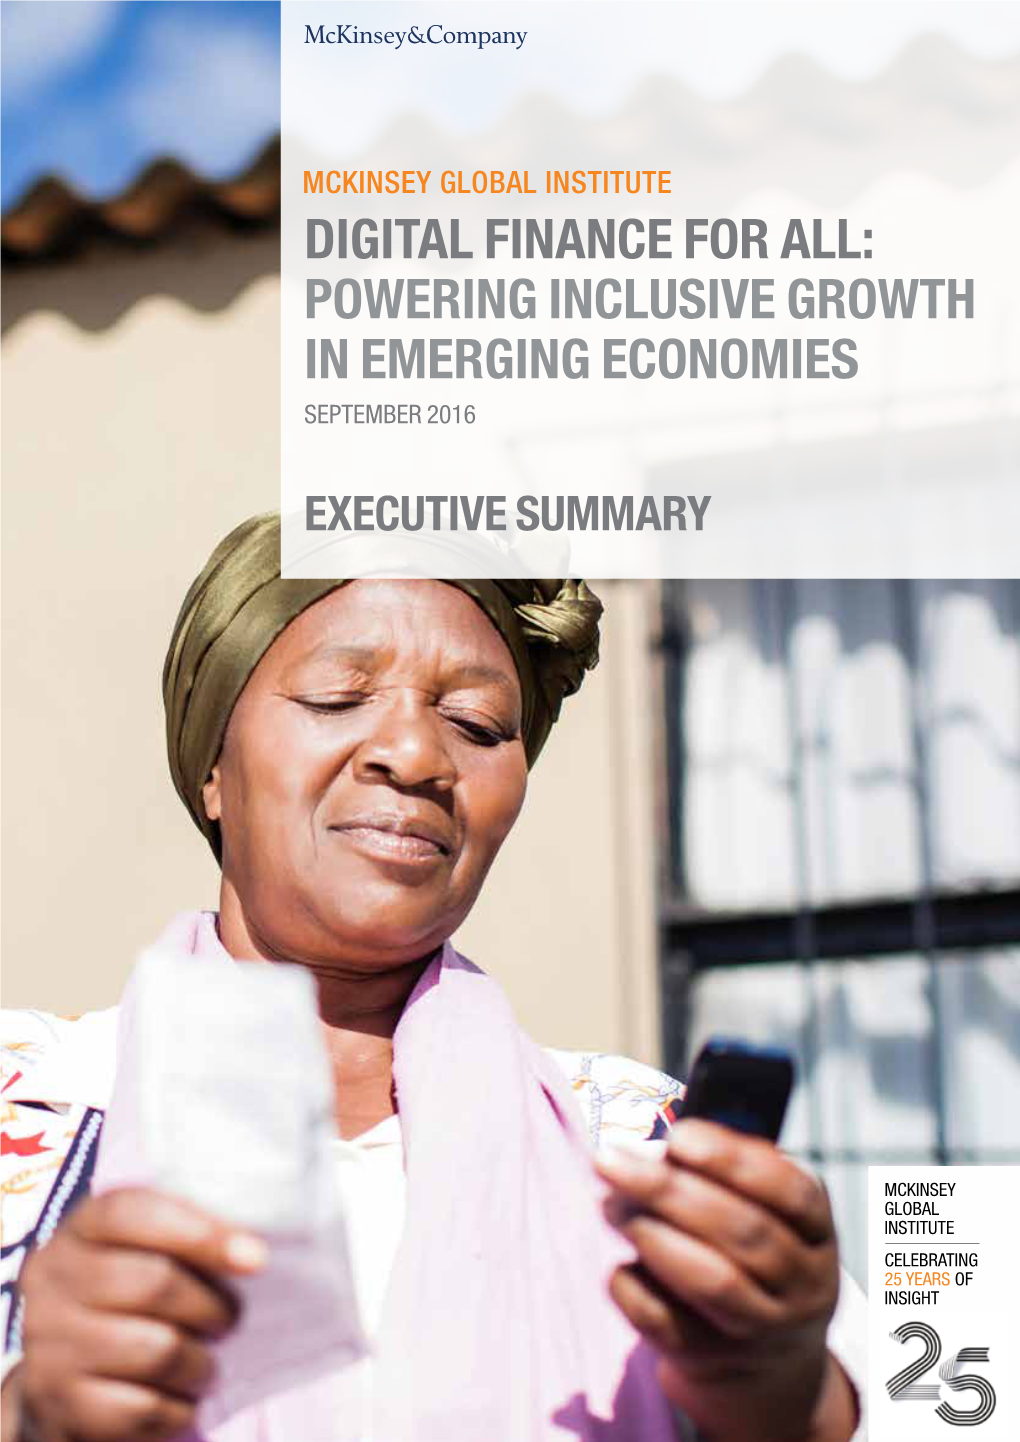 Digital Finance for All: Powering Inclusive Growth in Emerging Economies September 2016